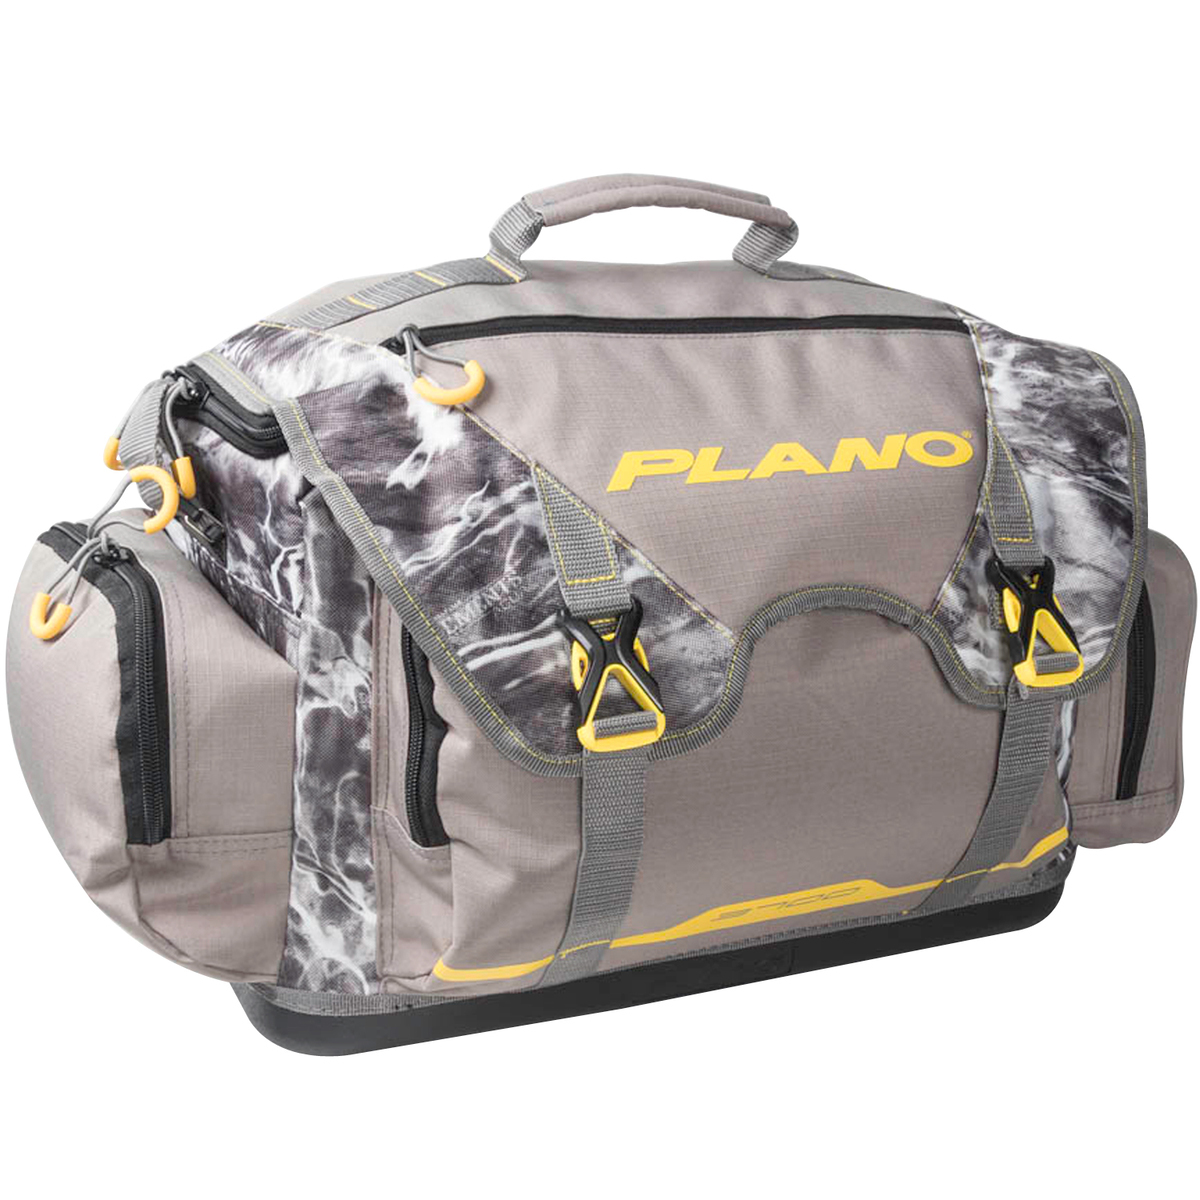 A-Series 2.0 Duffel Bag from Plano is designed to hold Stowaway®boxes and  more